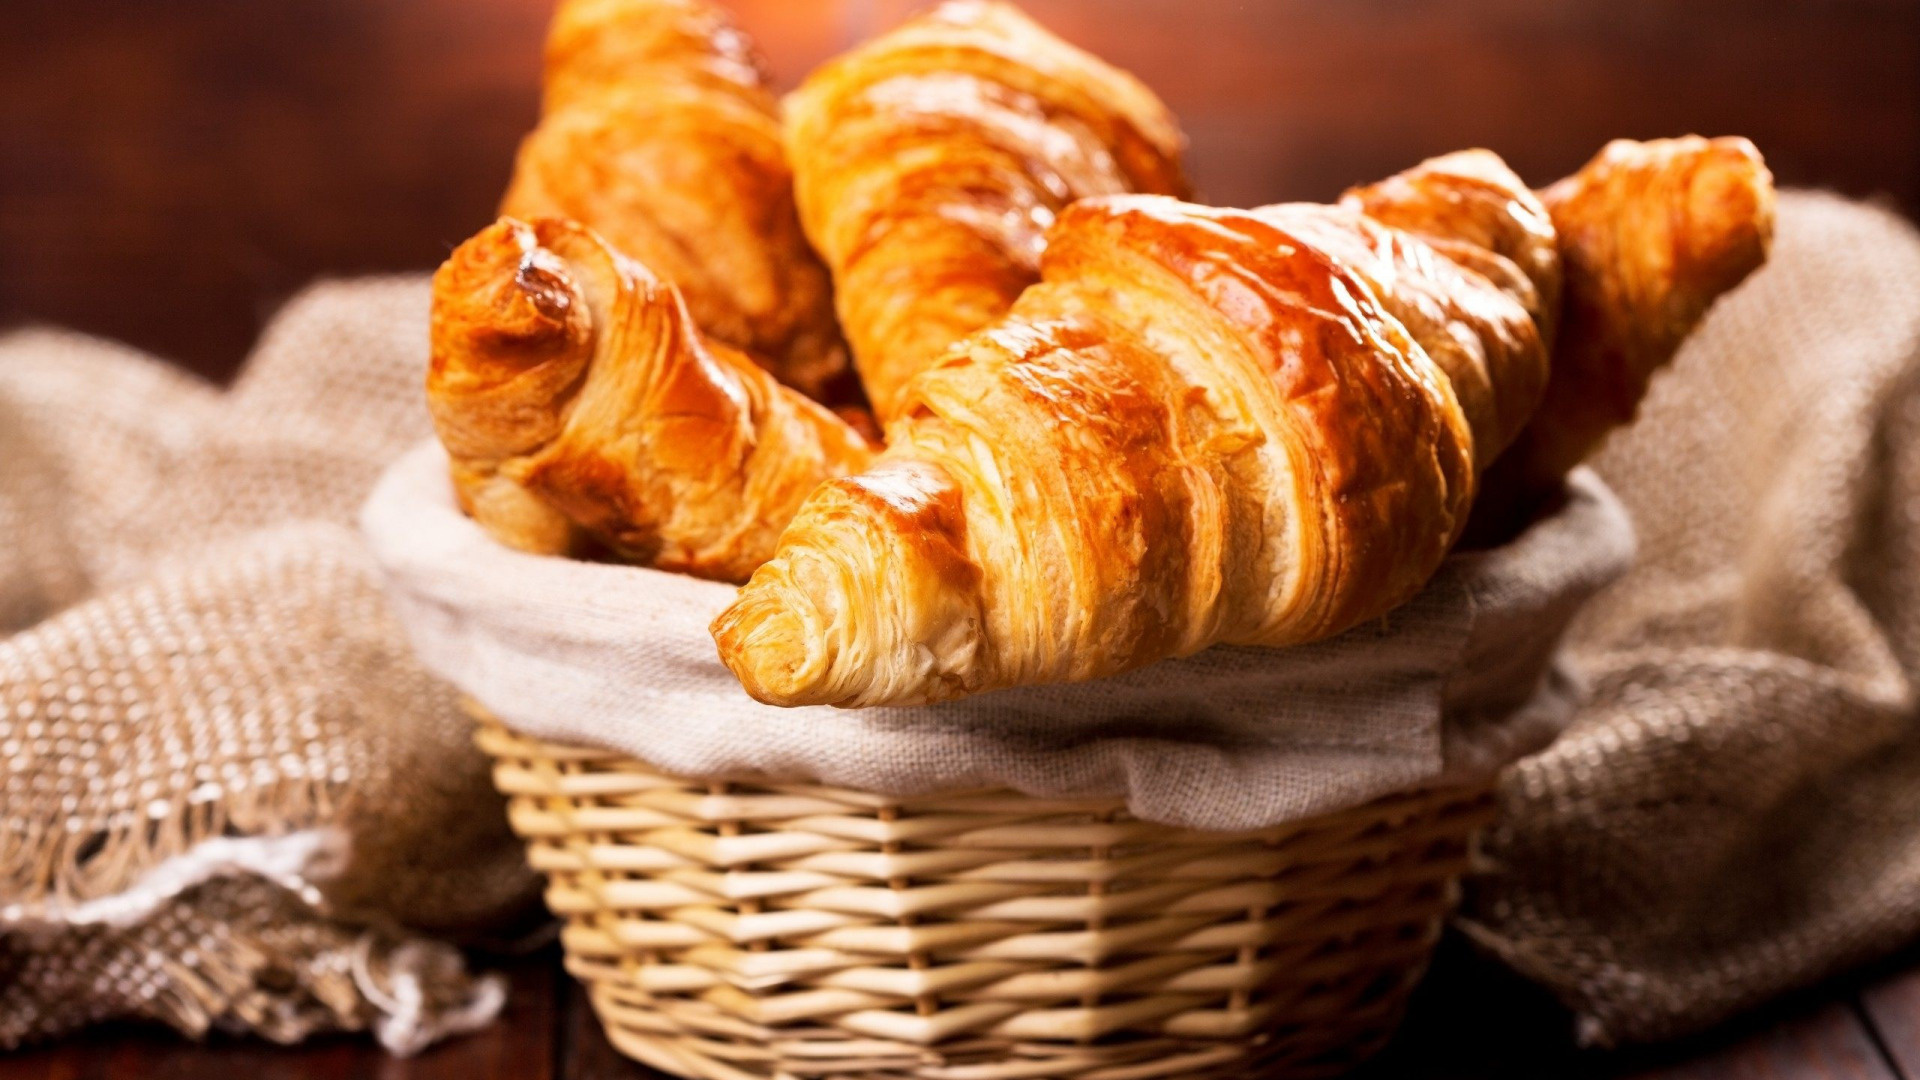 Croissant: Displayed in bakery shop windows, Golden, flaky appearance. 1920x1080 Full HD Wallpaper.